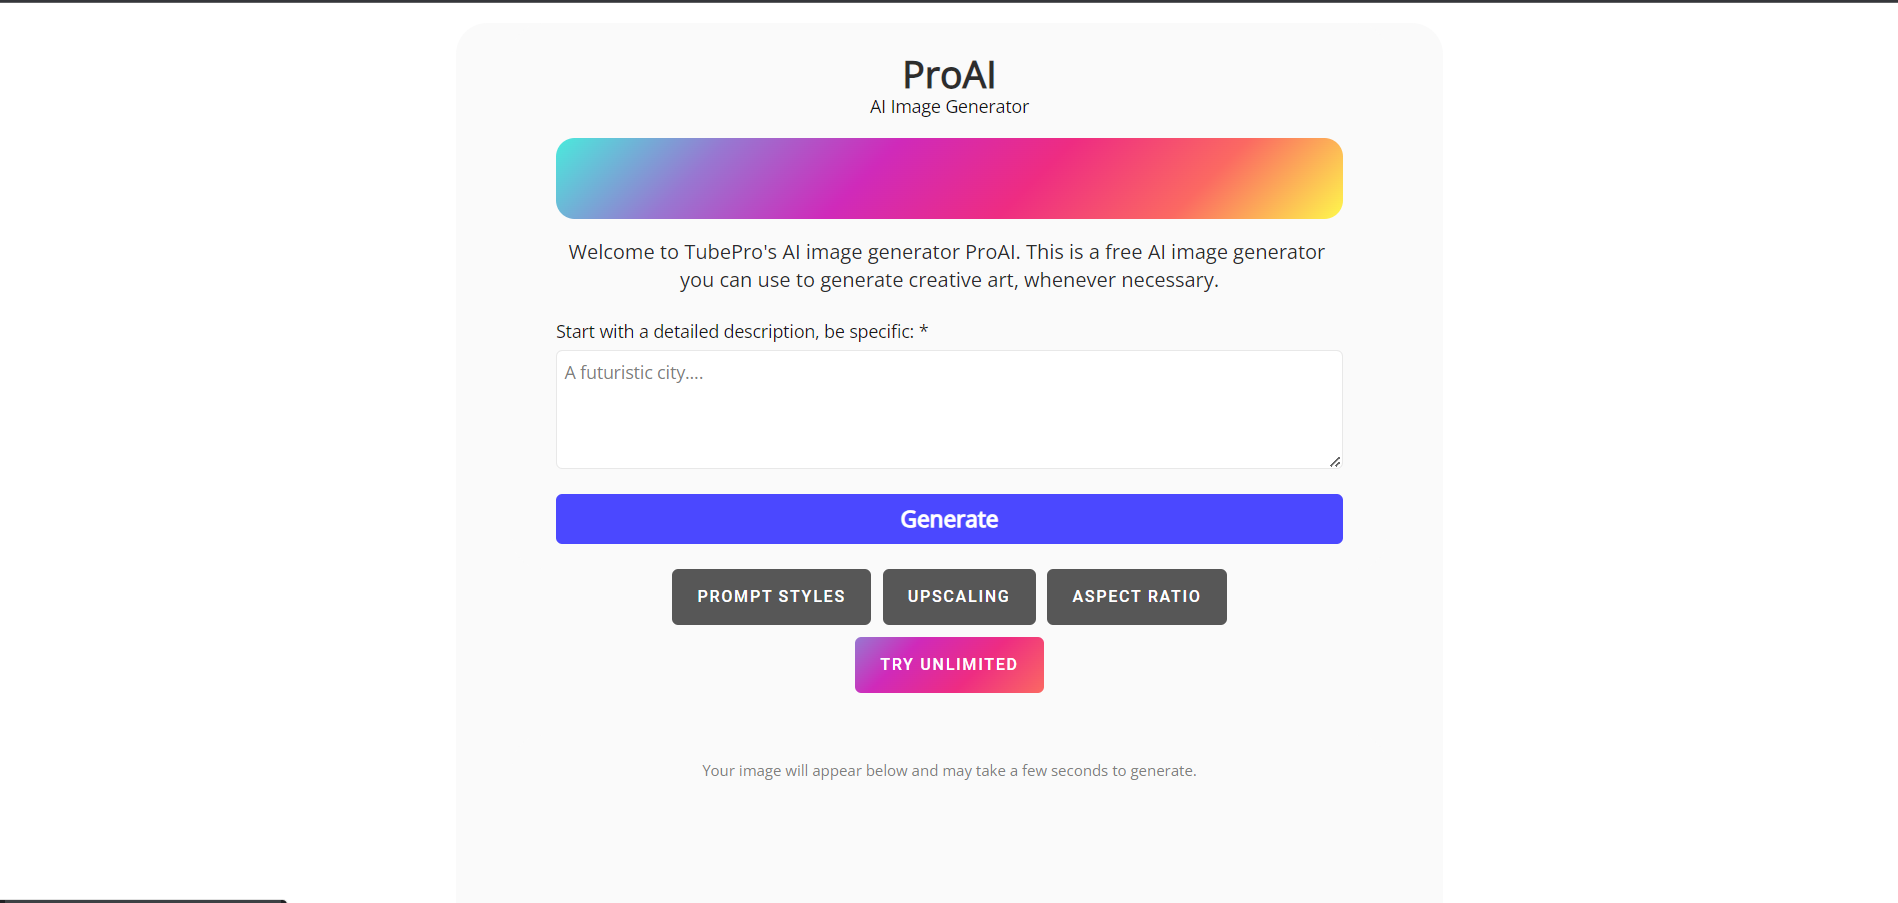 ProAIAI image generator creates stunning and professional images effortlessly